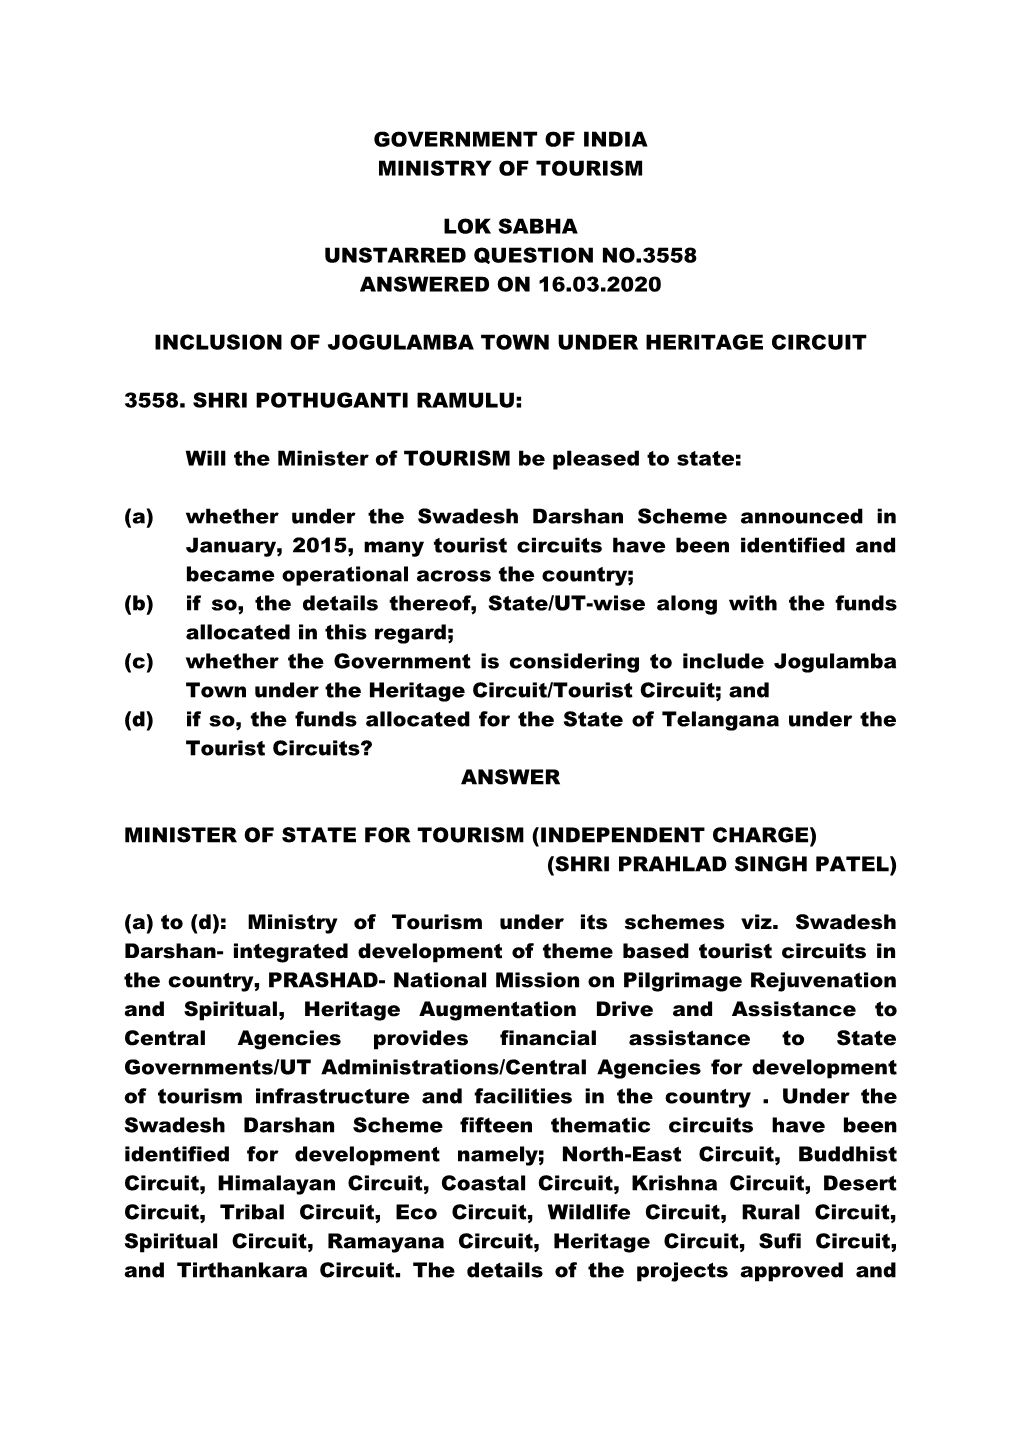 Government of India Ministry of Tourism Lok Sabha Unstarred Question No.3558 Answered on 16.03.2020 Inclusion of Jogulamba Town